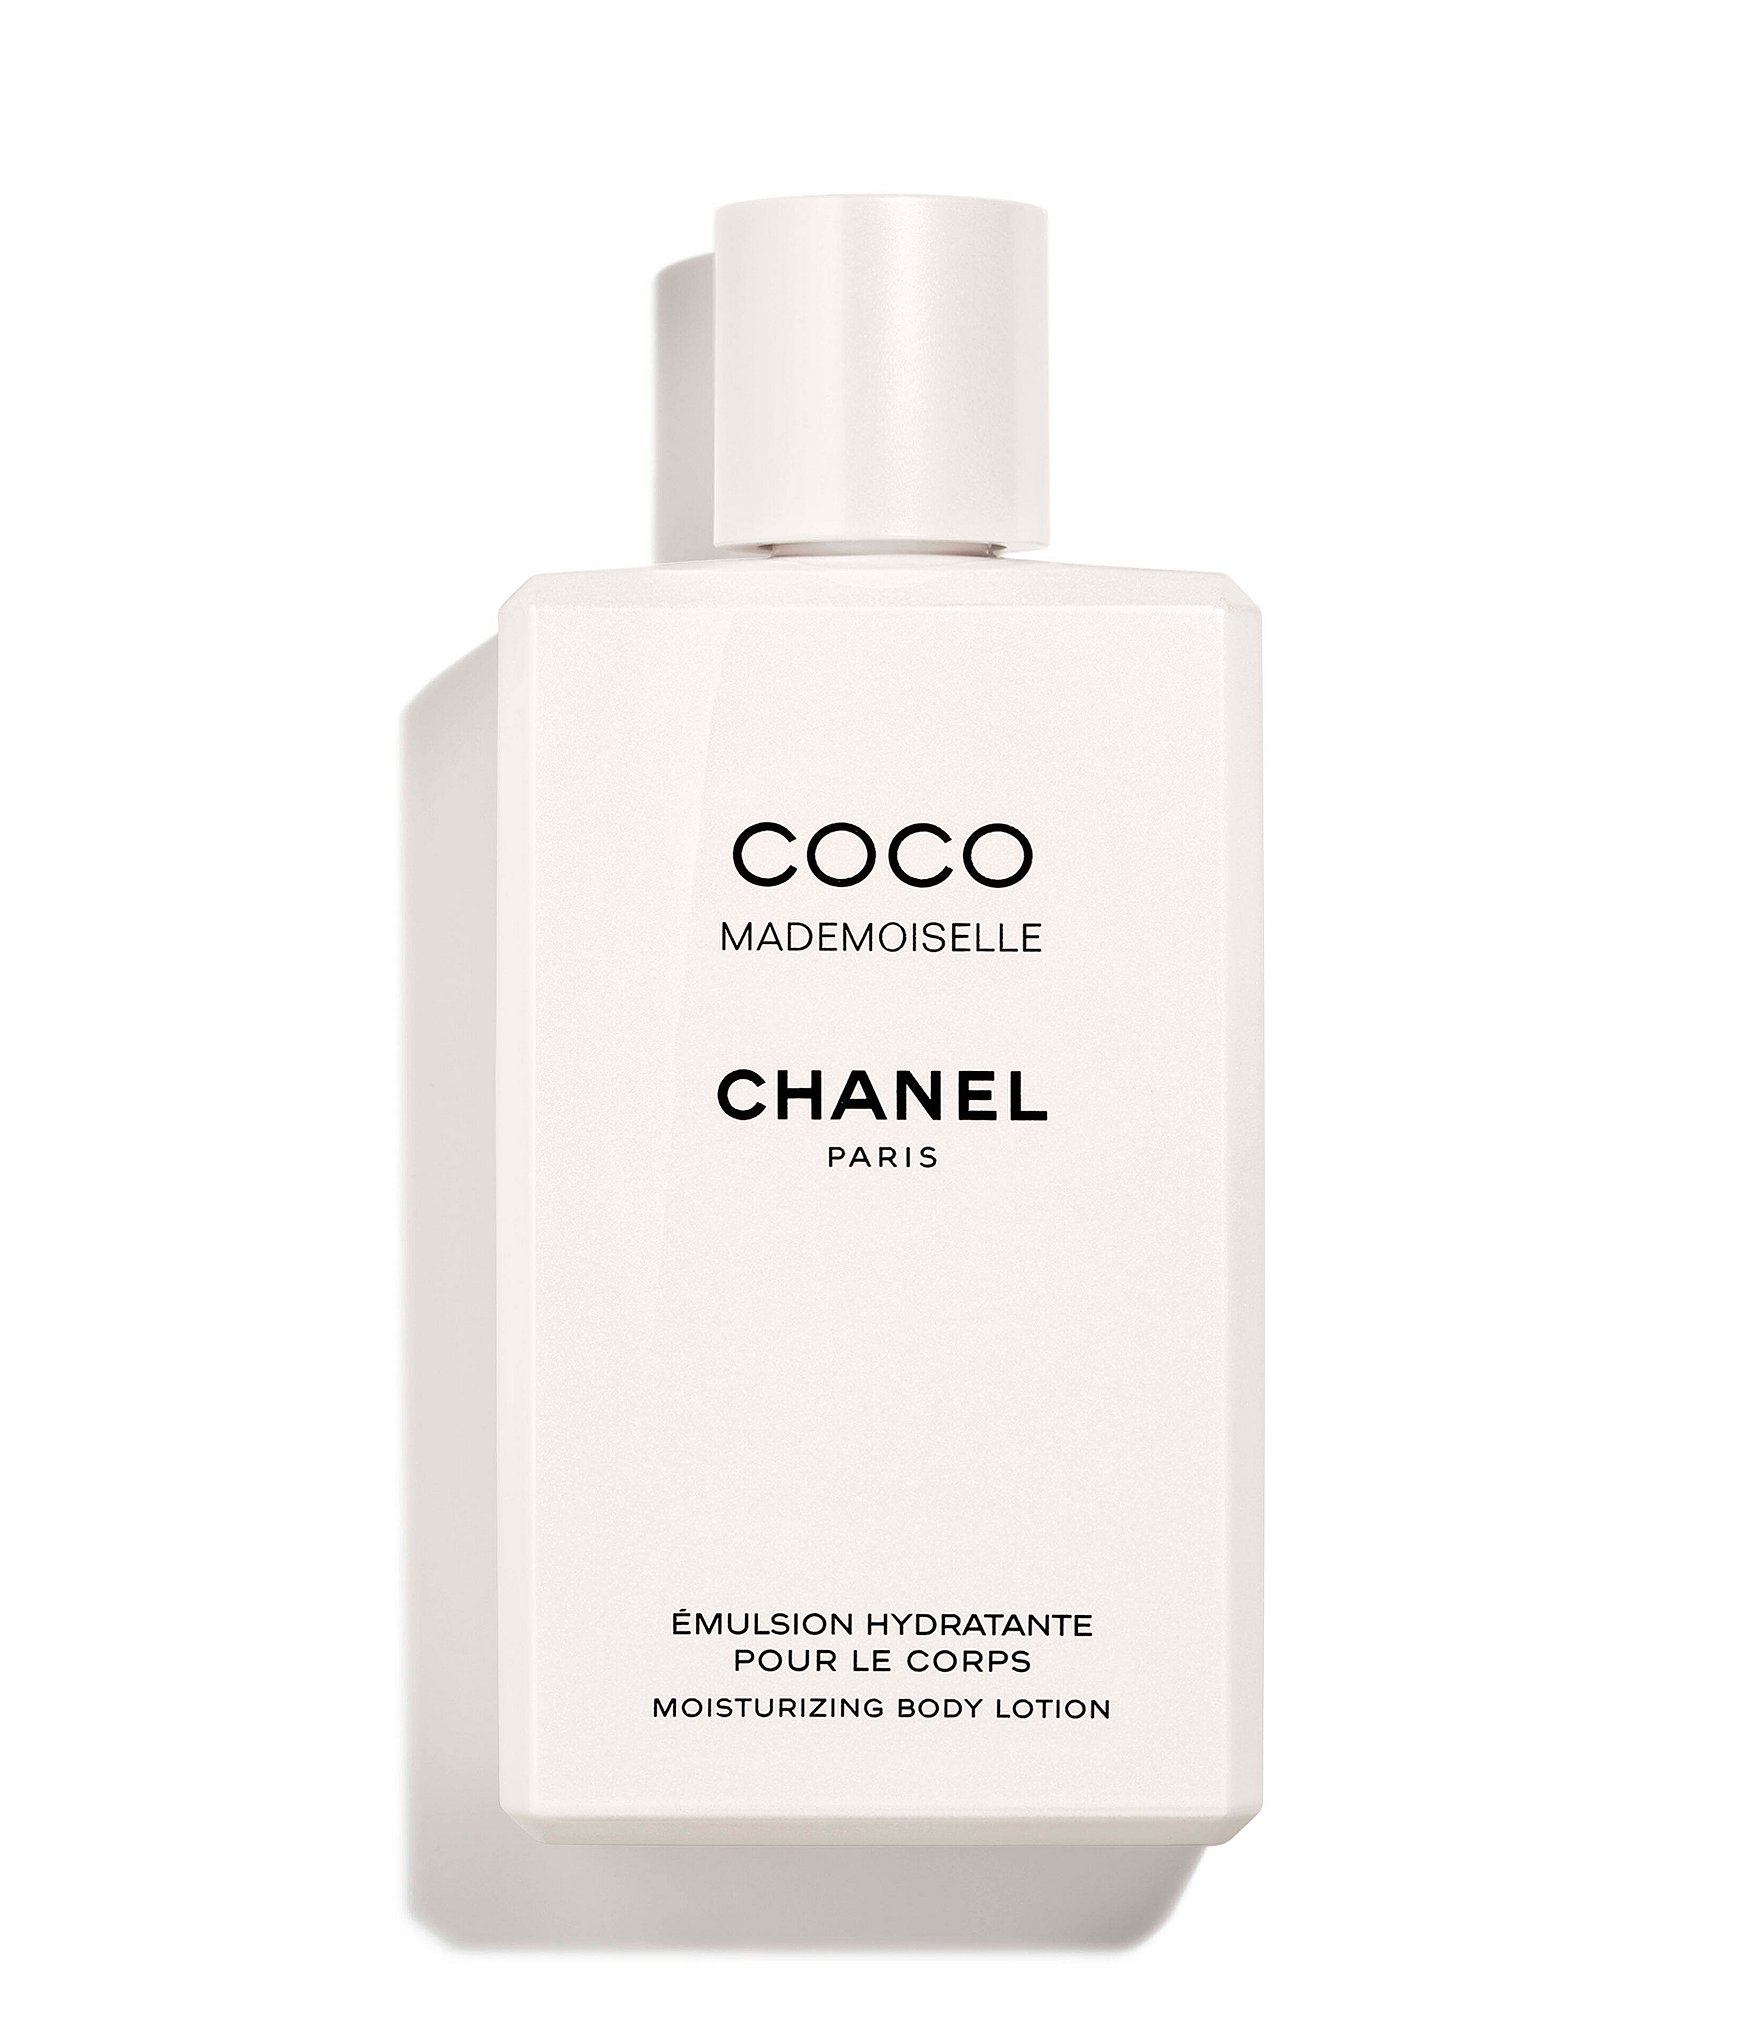 mademoiselle chanel body lotion